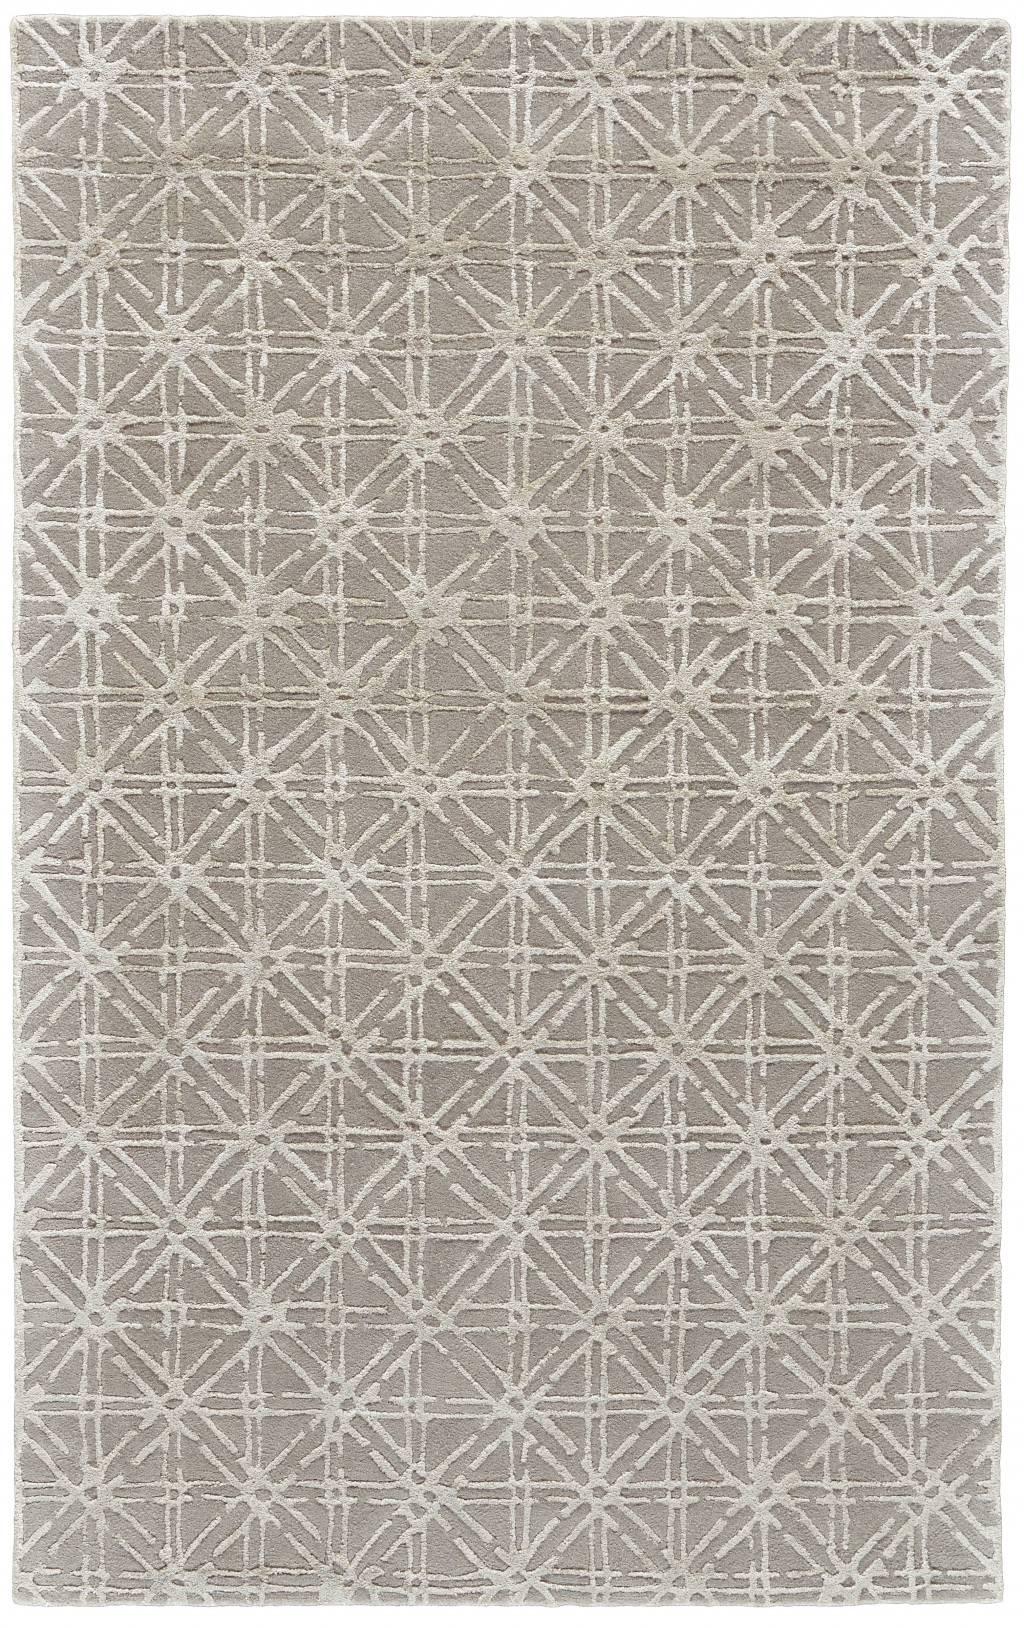 2' X 3' Taupe Ivory And Tan Wool Abstract Tufted Handmade Area Rug-511592-1